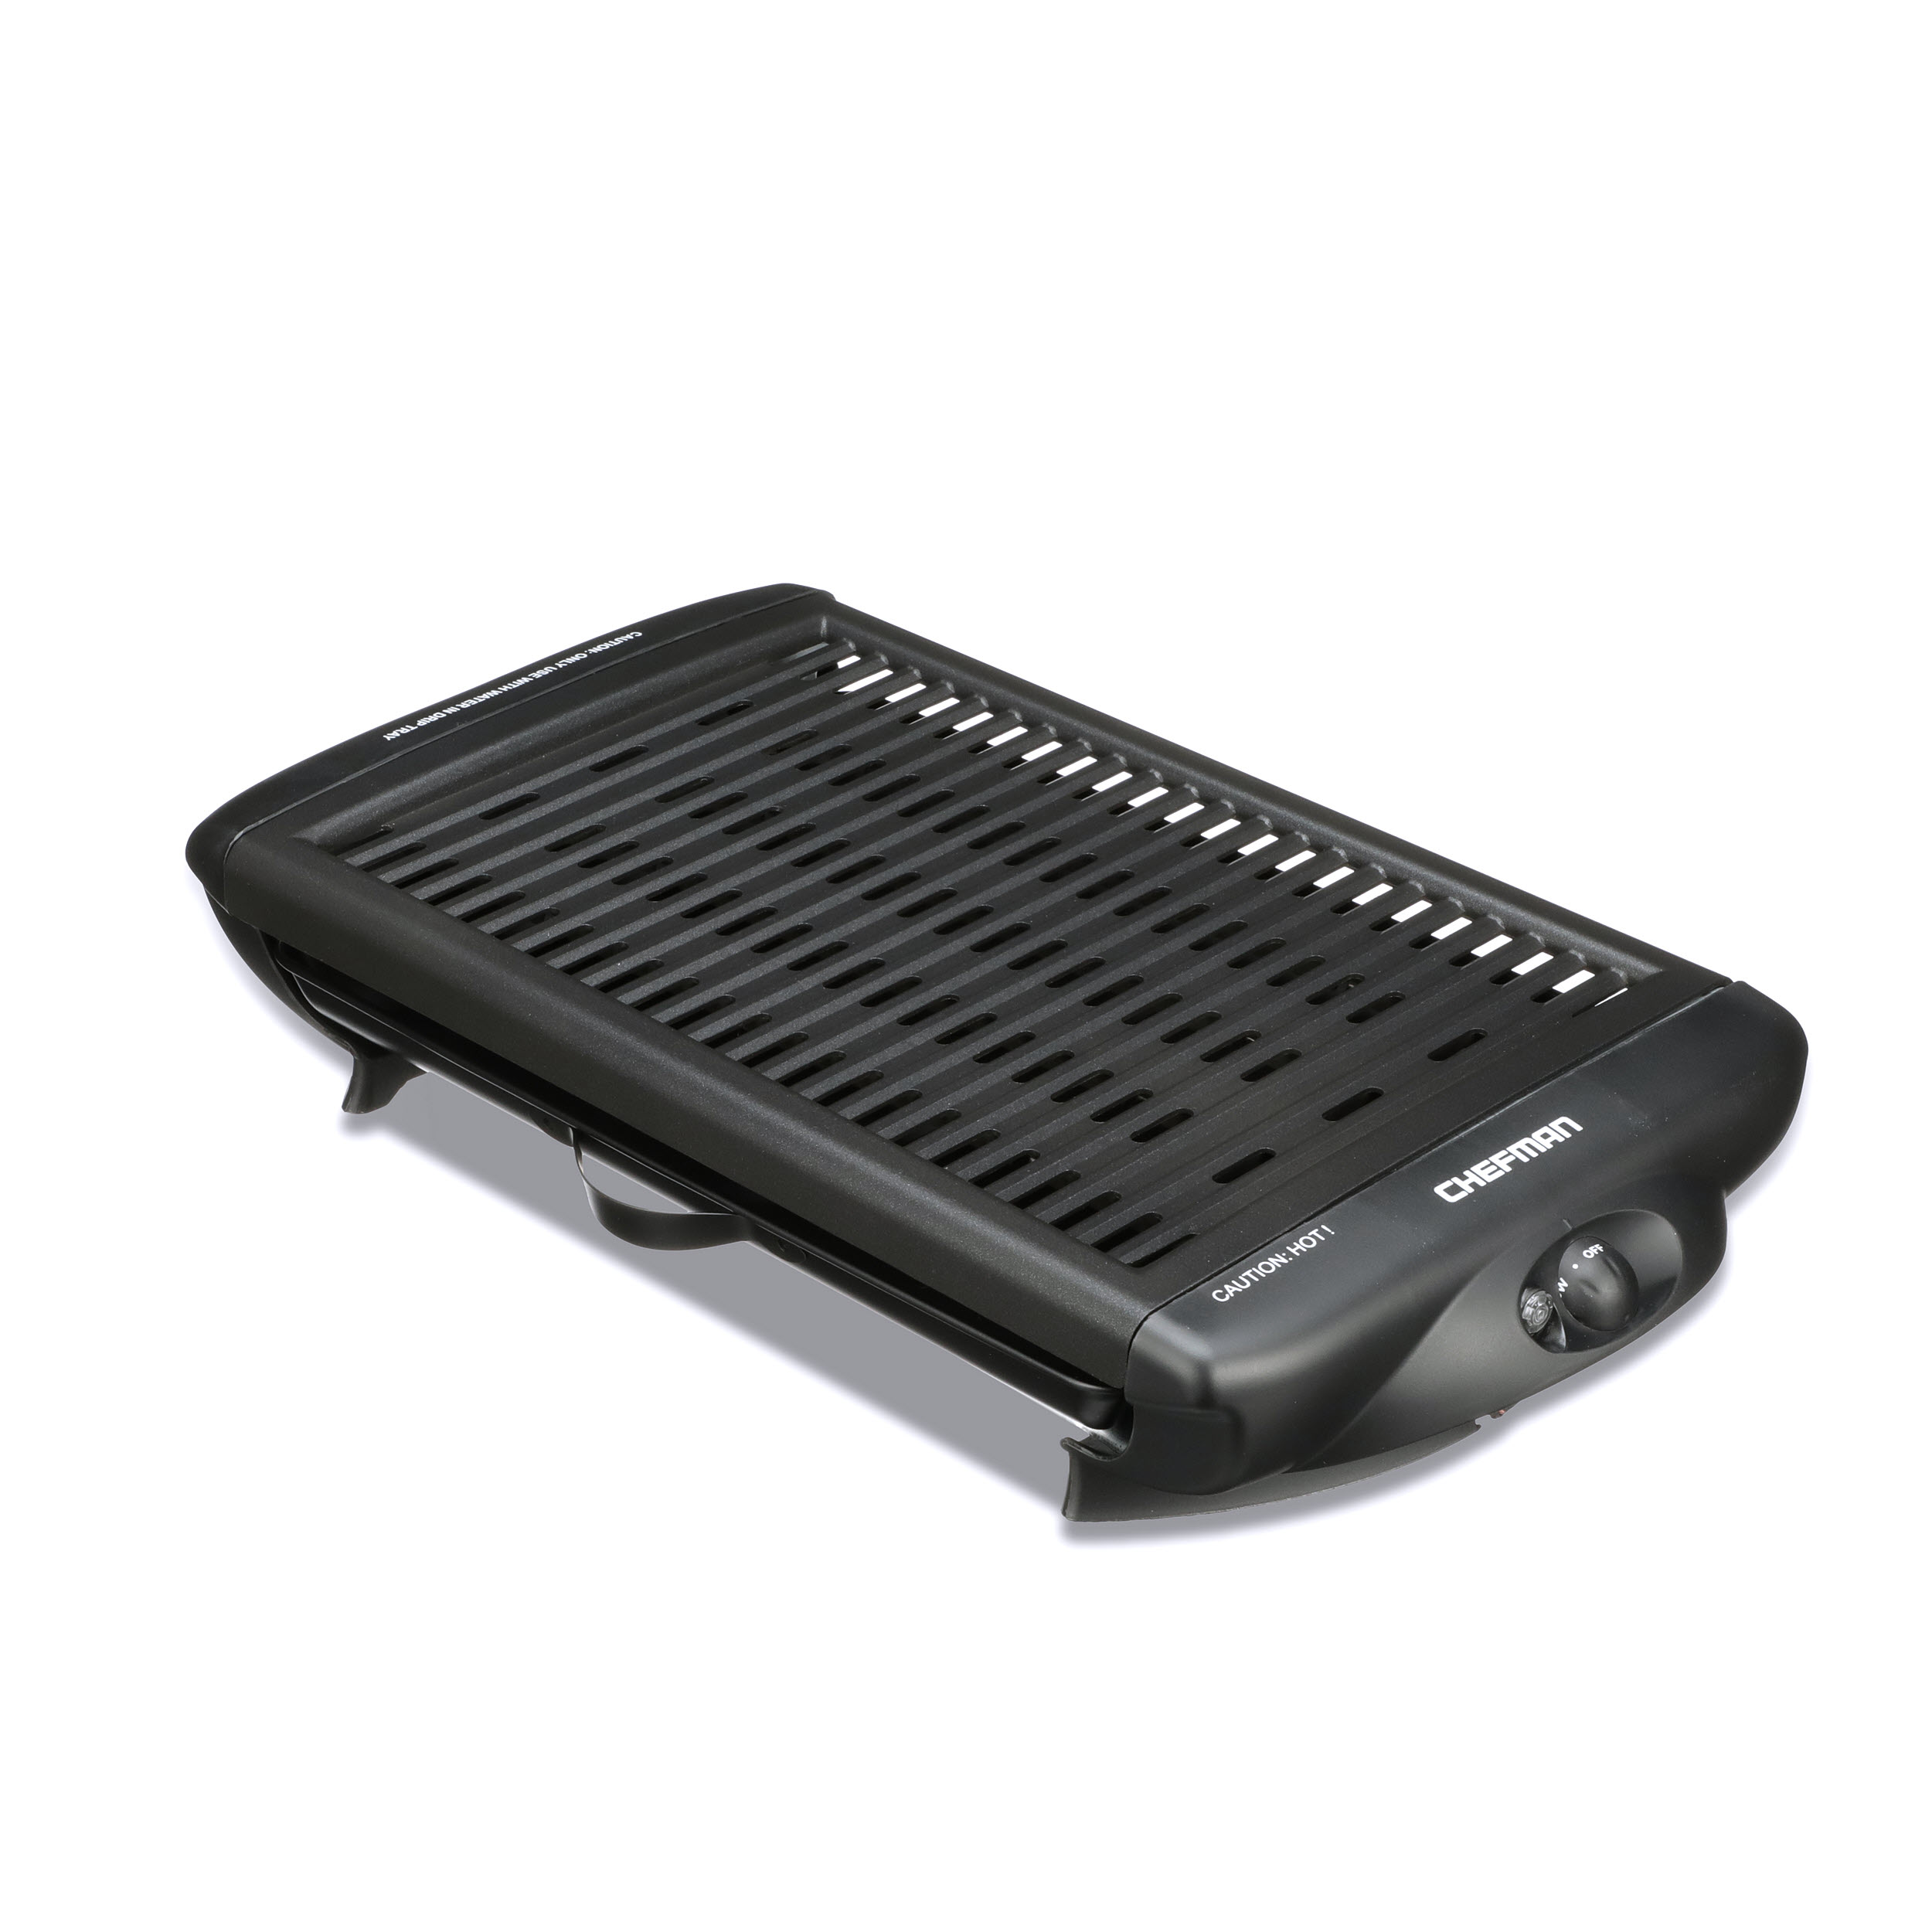 Chefman Electric Smokeless Indoor Grill with Nonstick Coating - Black, 15  in - Fred Meyer